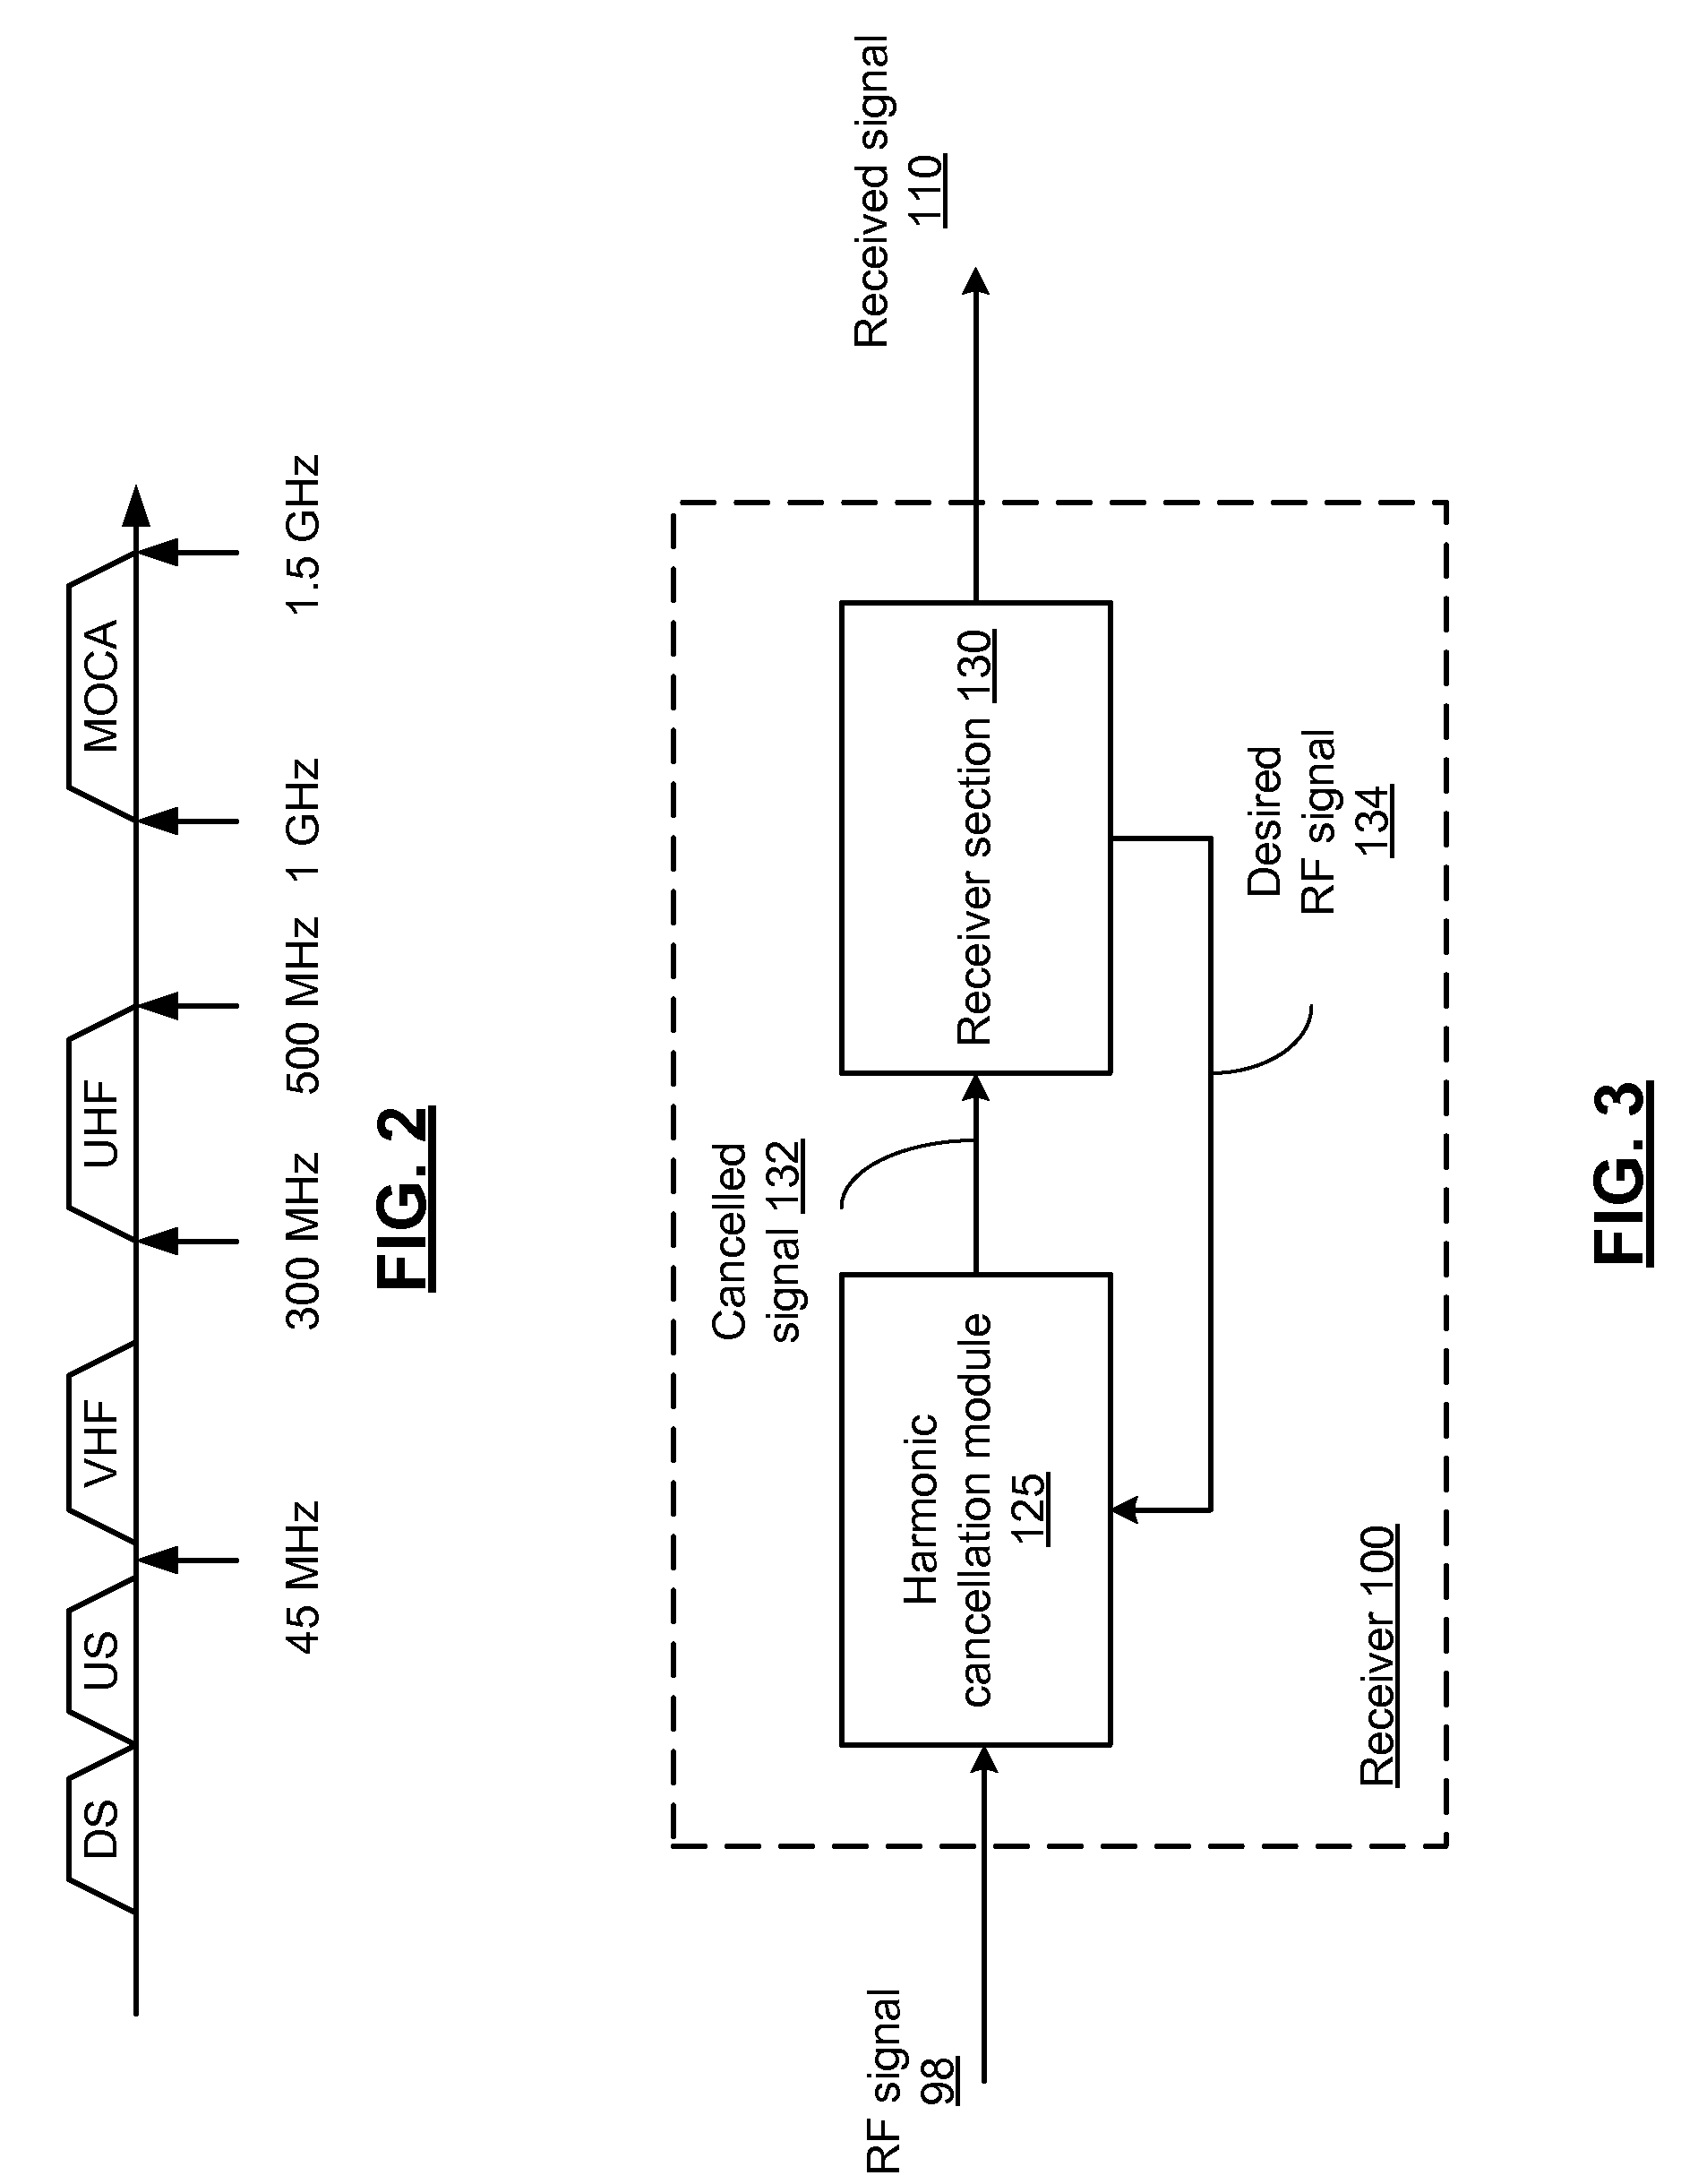 Multi-band receiver with harmonic cancellation and methods for use therewith